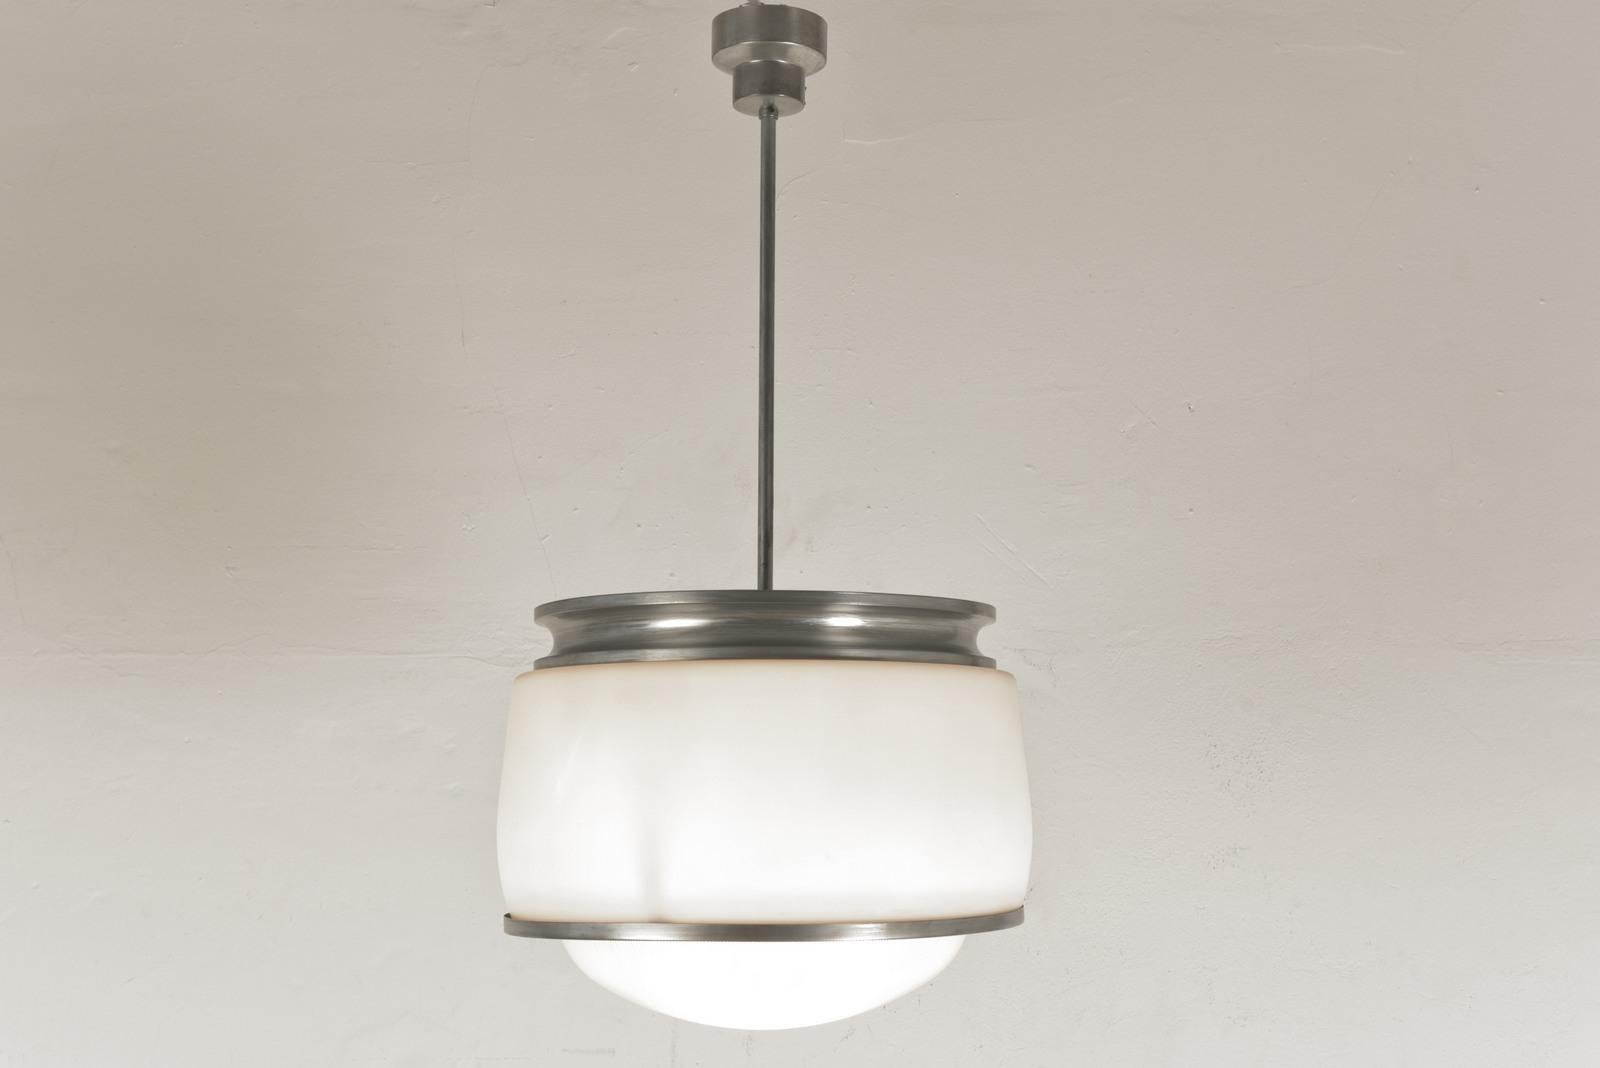 Metal Pendant Lamp Kappa by Sergio Mazza for Artemide, Italy - 1960s For Sale